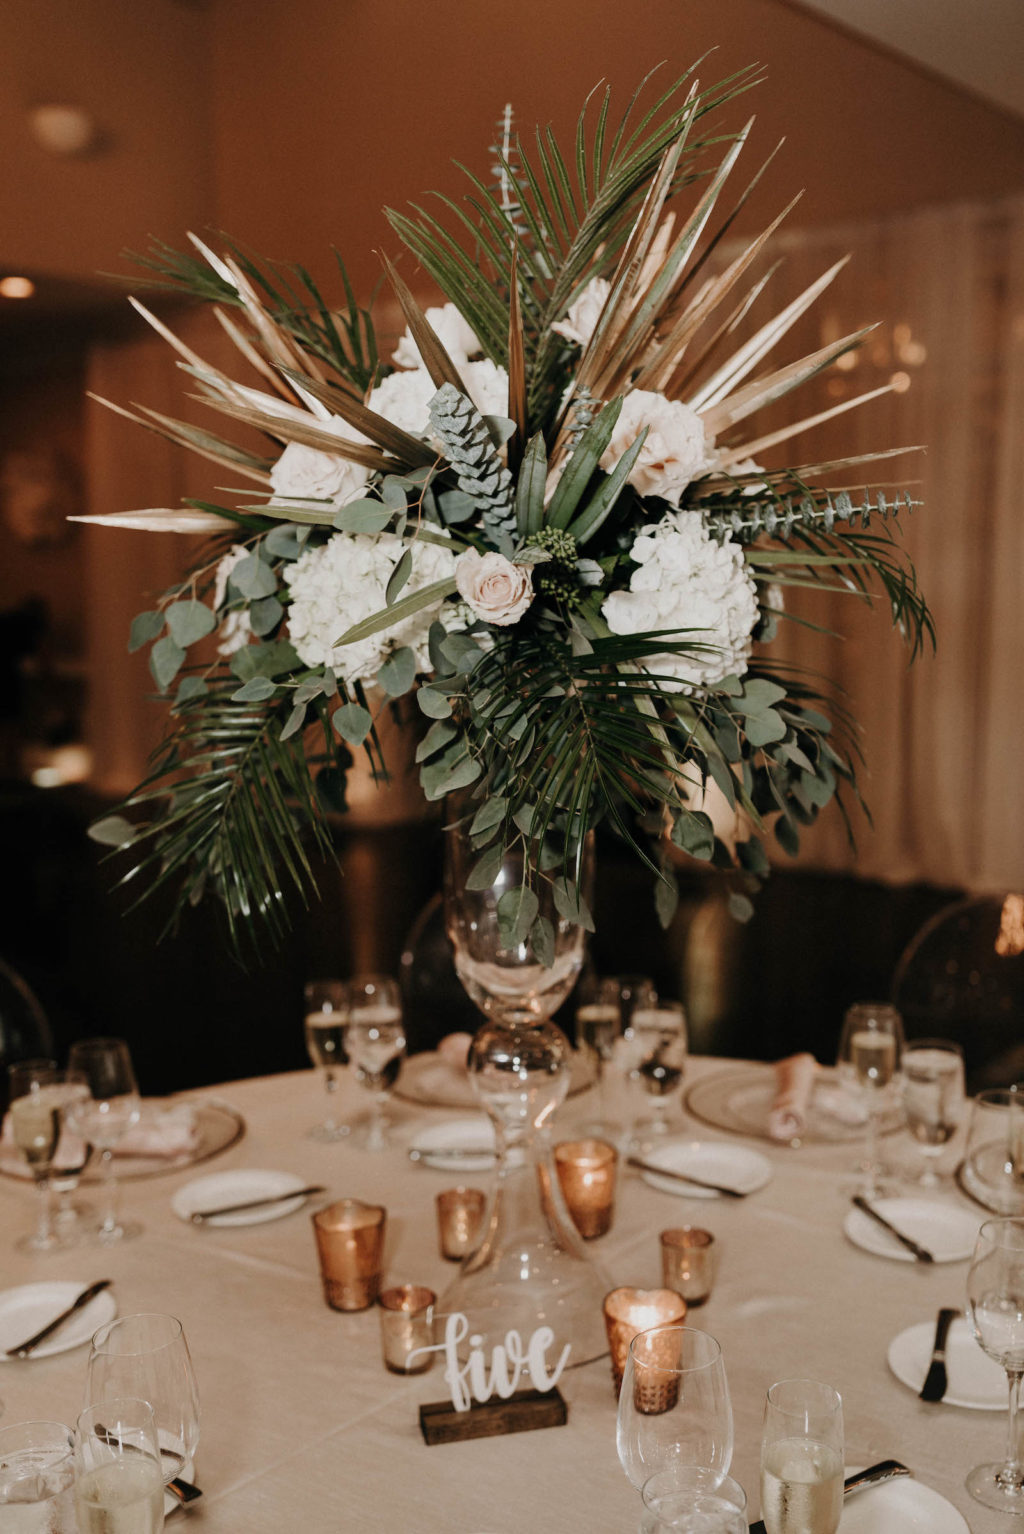 Elegant and Beach Table Centerpieces with Roses, Palms, and Greenery | Wedding Centerpieces for Your Florida Wedding